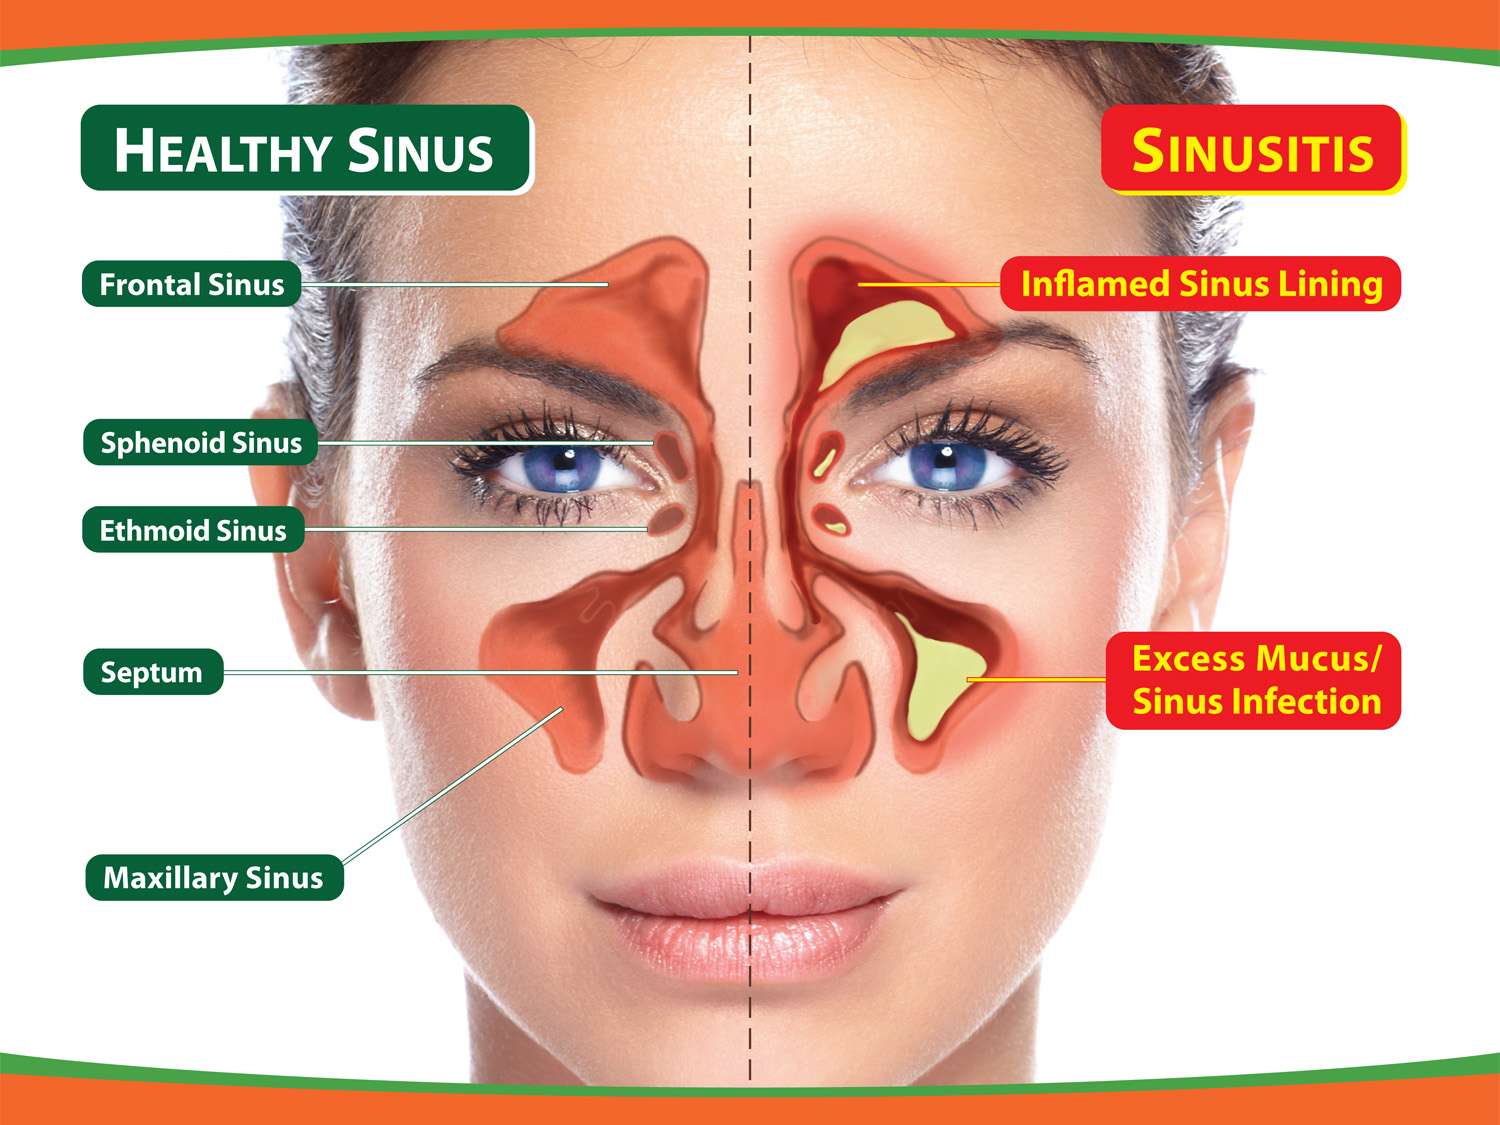 Ways to Relieve Sinus Pain, Aches and Congestion